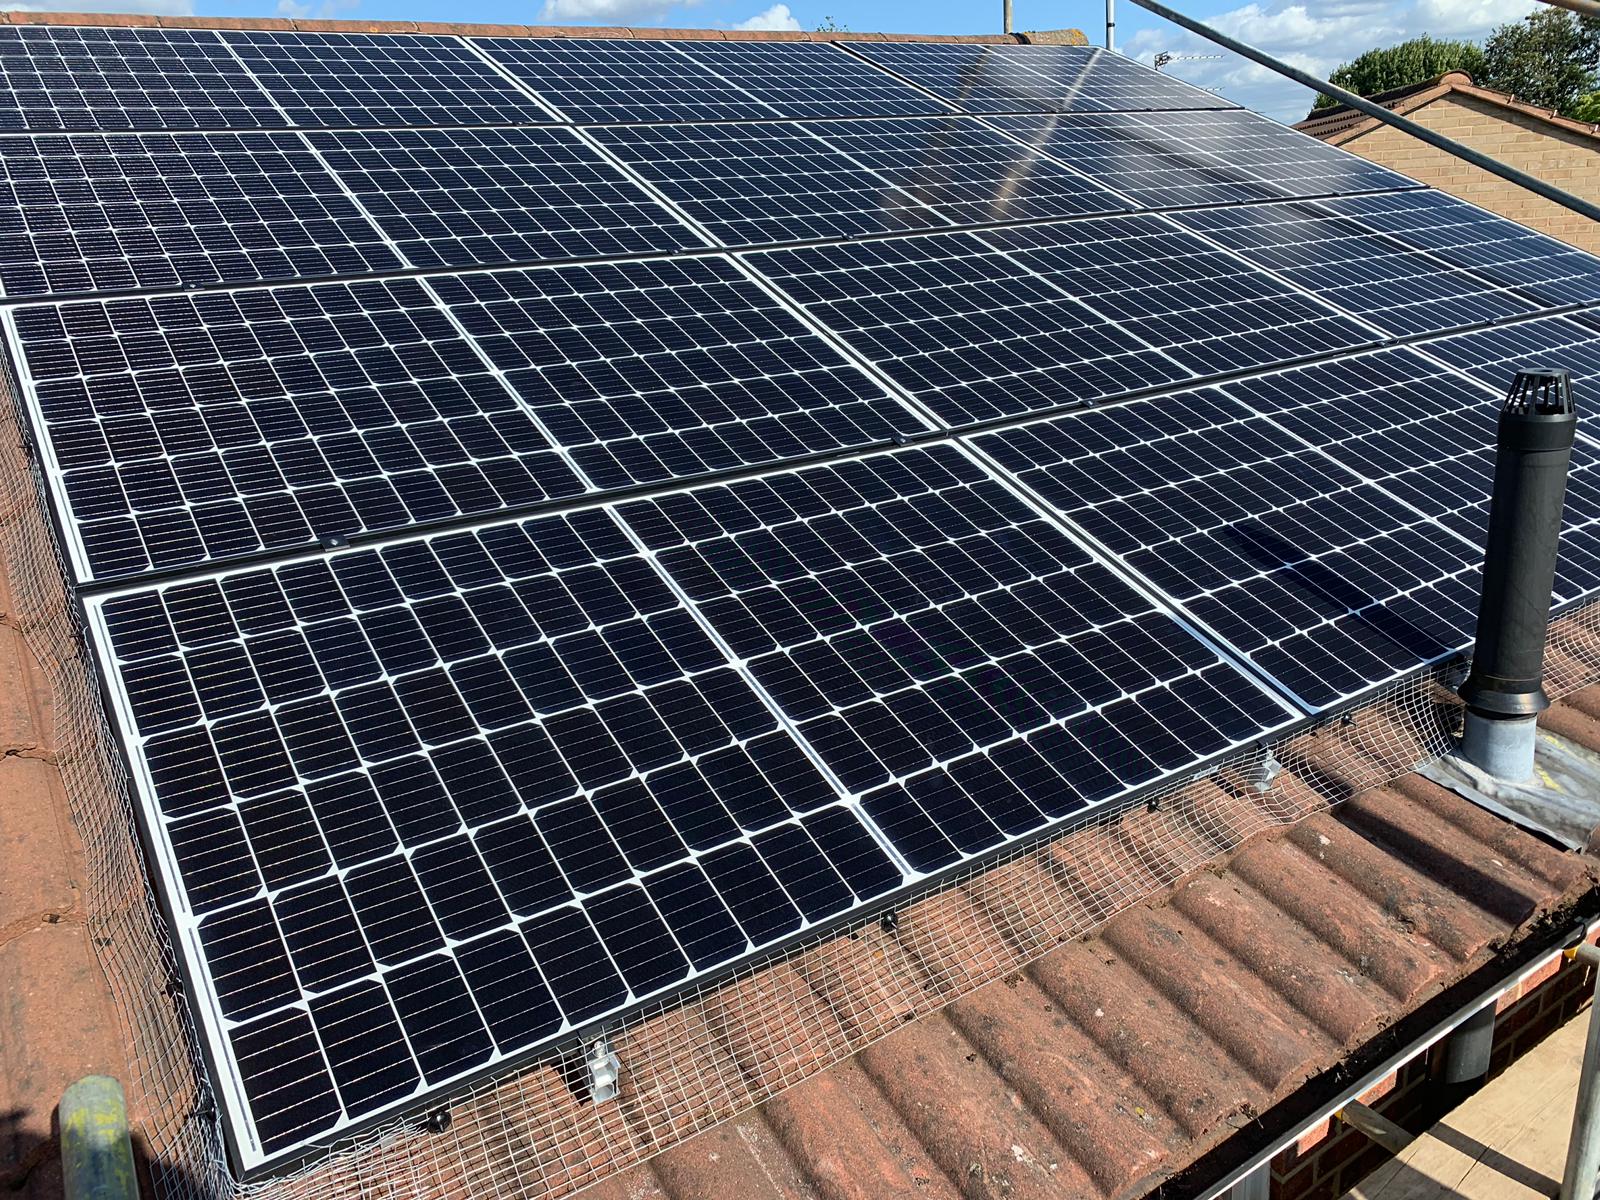 Solar panels installed for Mr TG in East Finchley, London (N2)